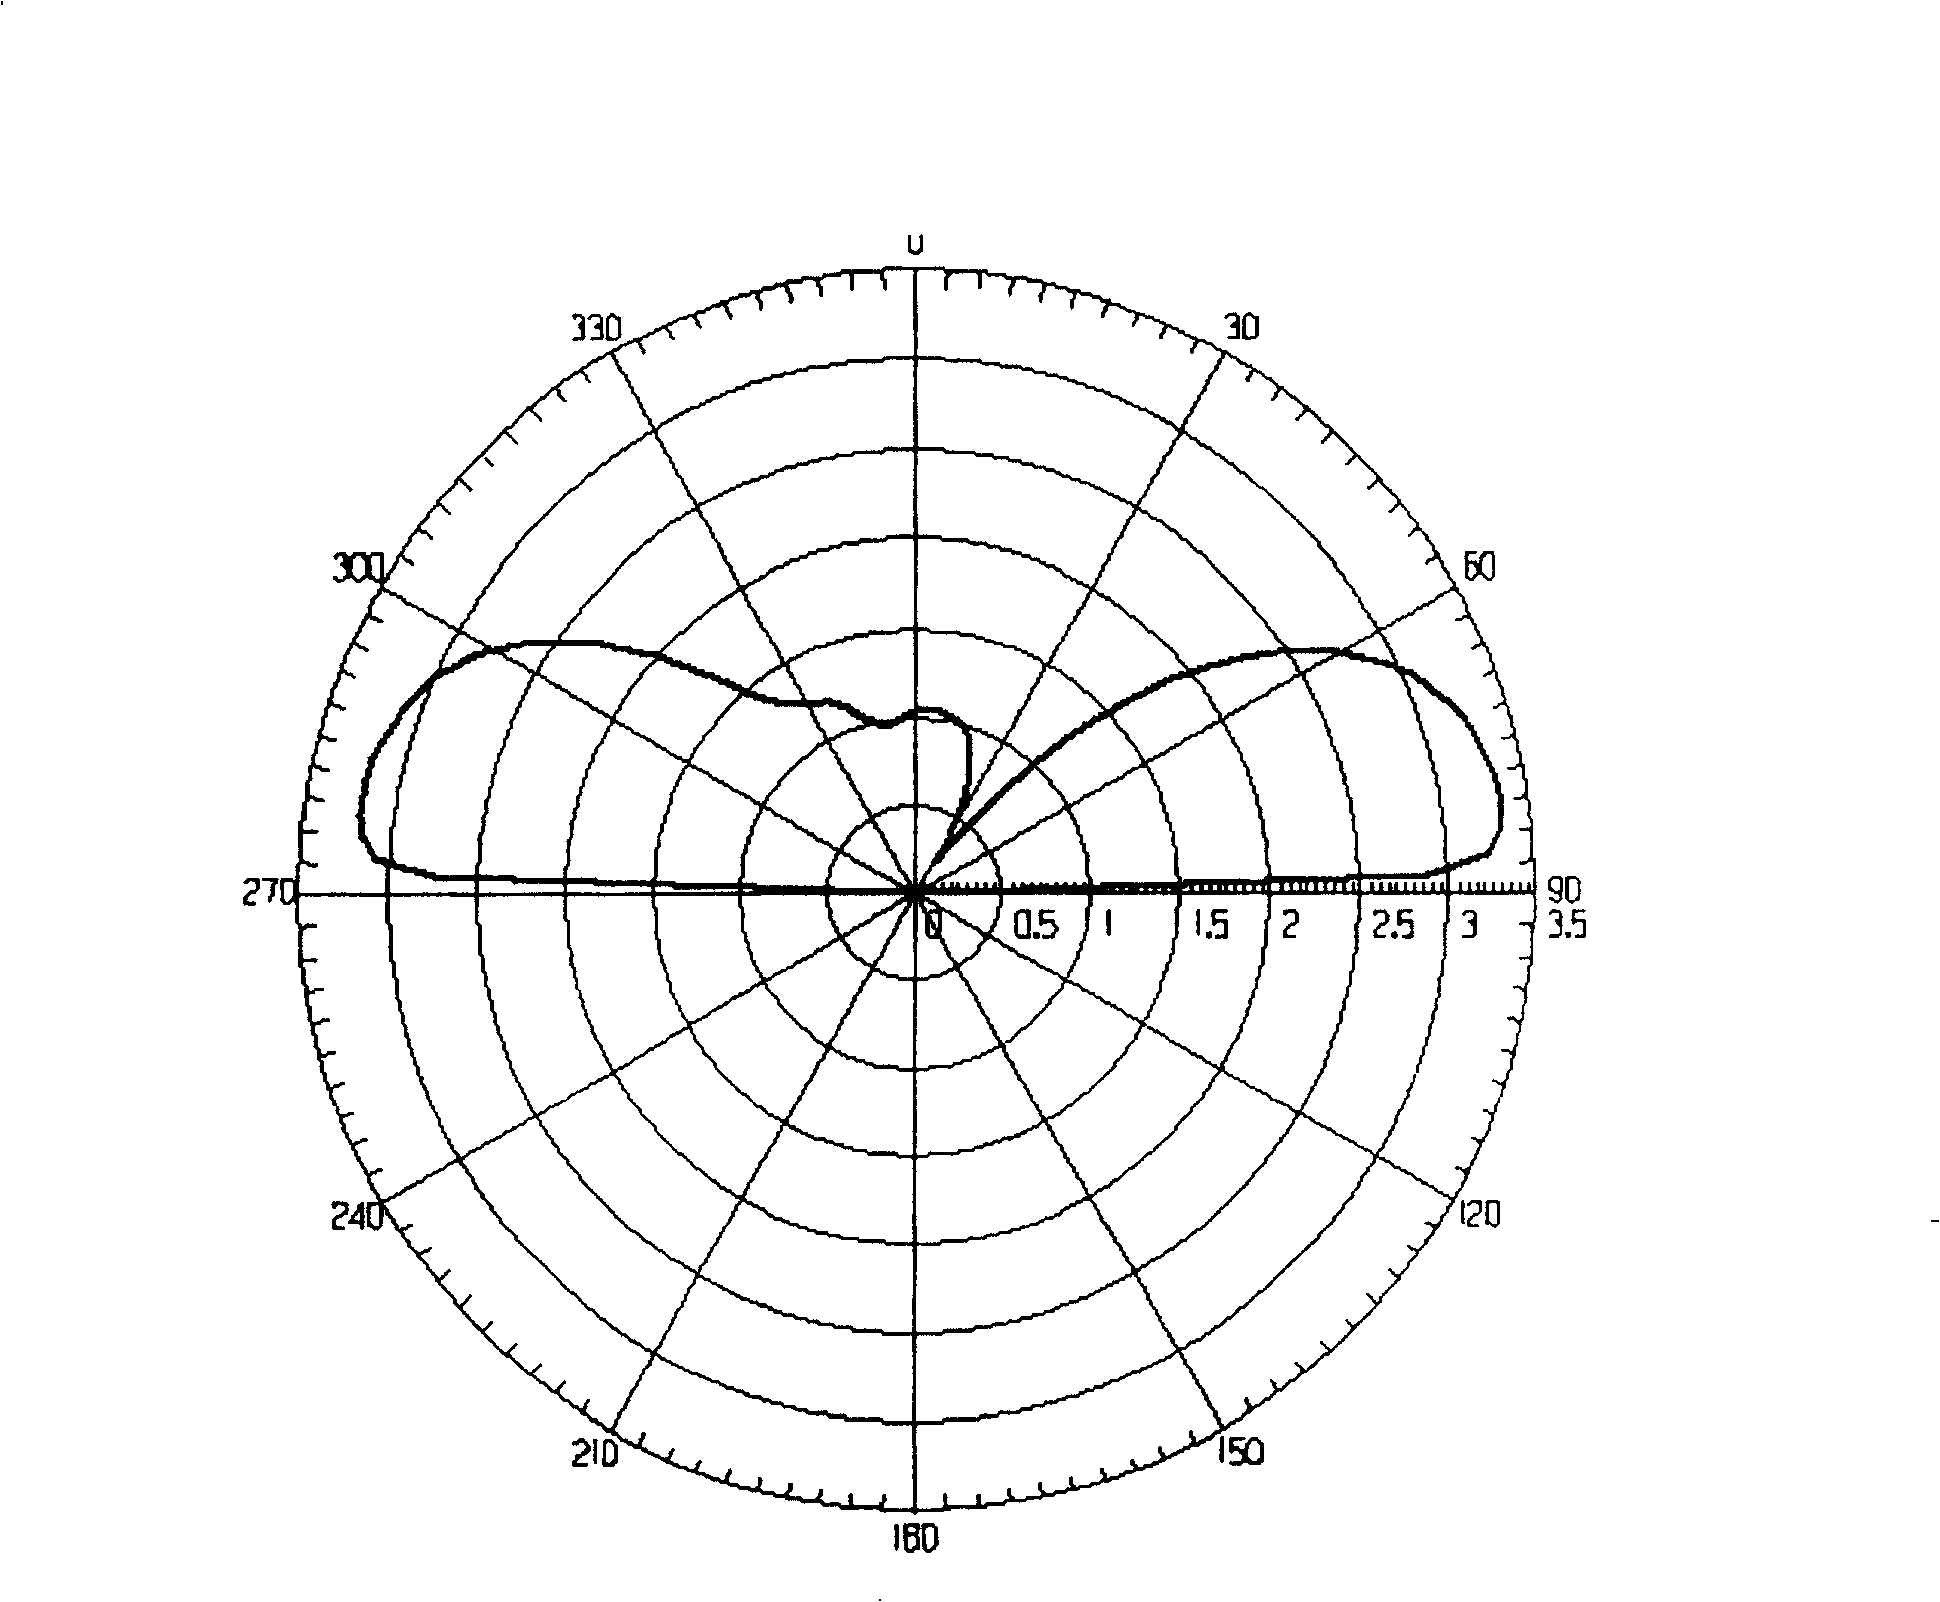 Method for assigning antenna directional pattern utilized to cover wireless signal in room